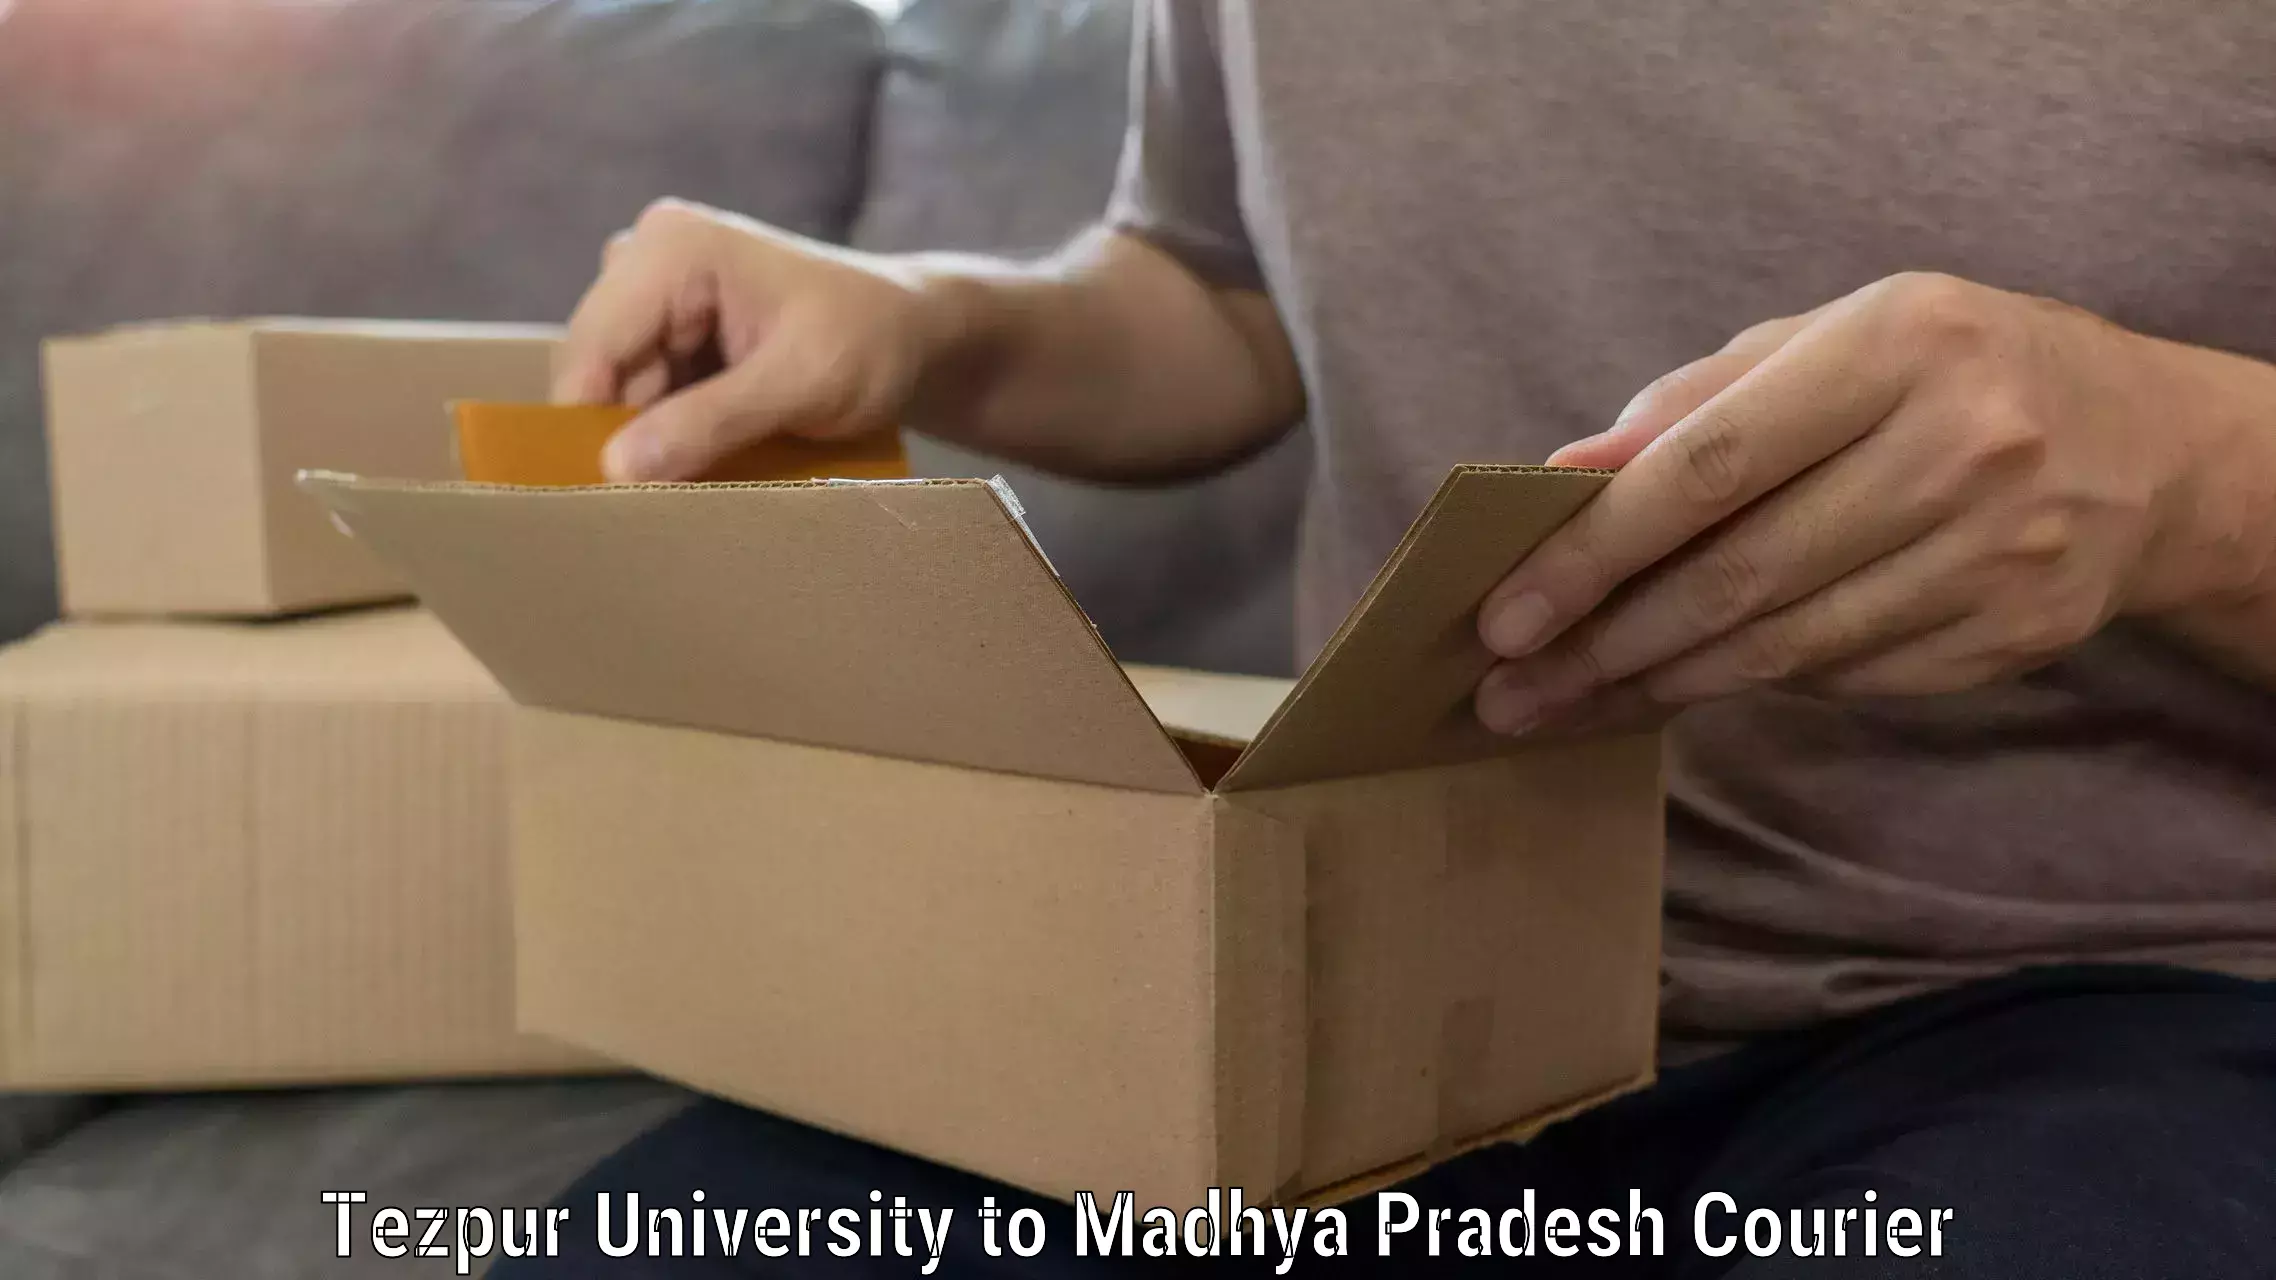 Professional movers and packers Tezpur University to Narsinghpur